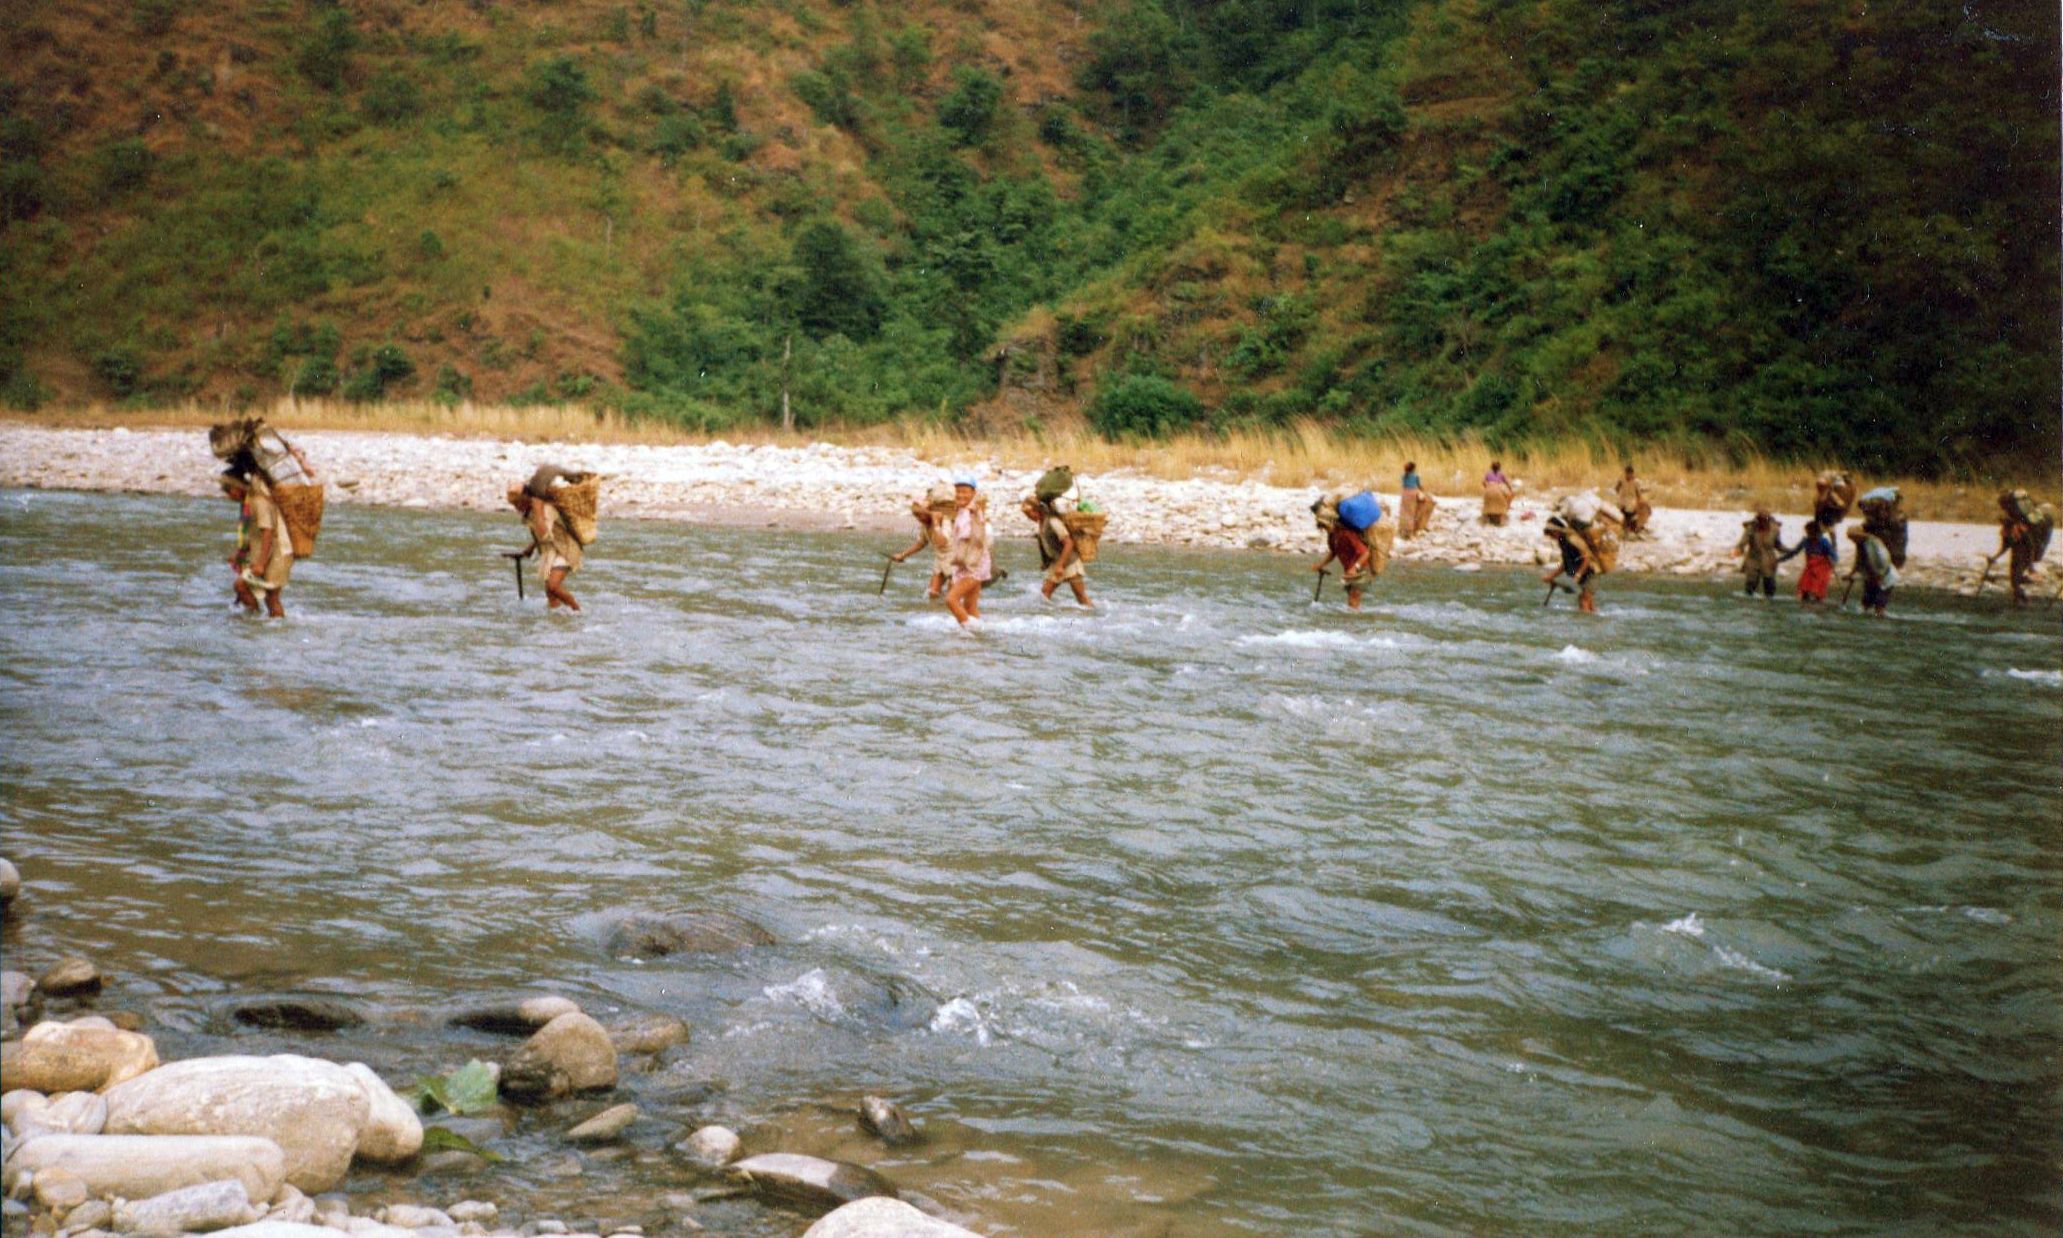 Trekking Porters fording the Piluwa Khola in the Arun Valley